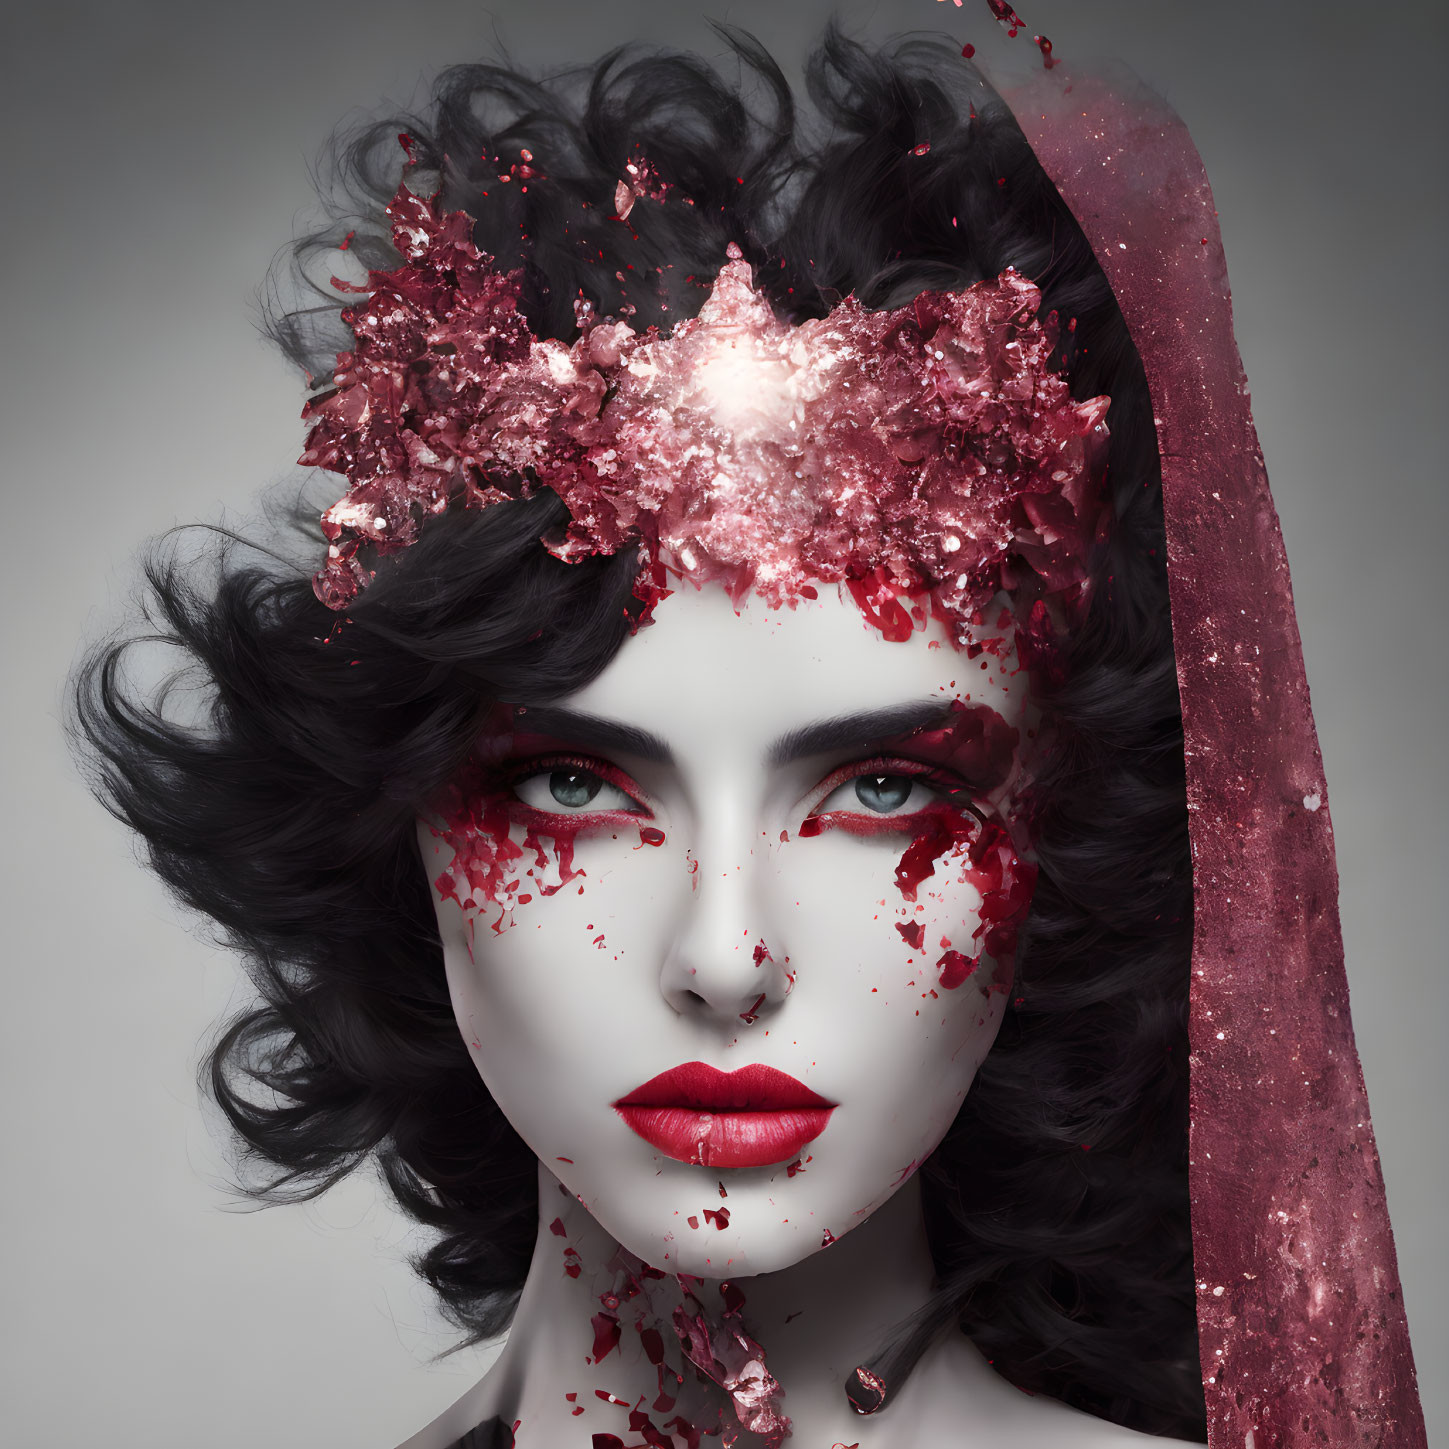 Woman with Splattered Red Paint Makeup and Crown of Red Splashes